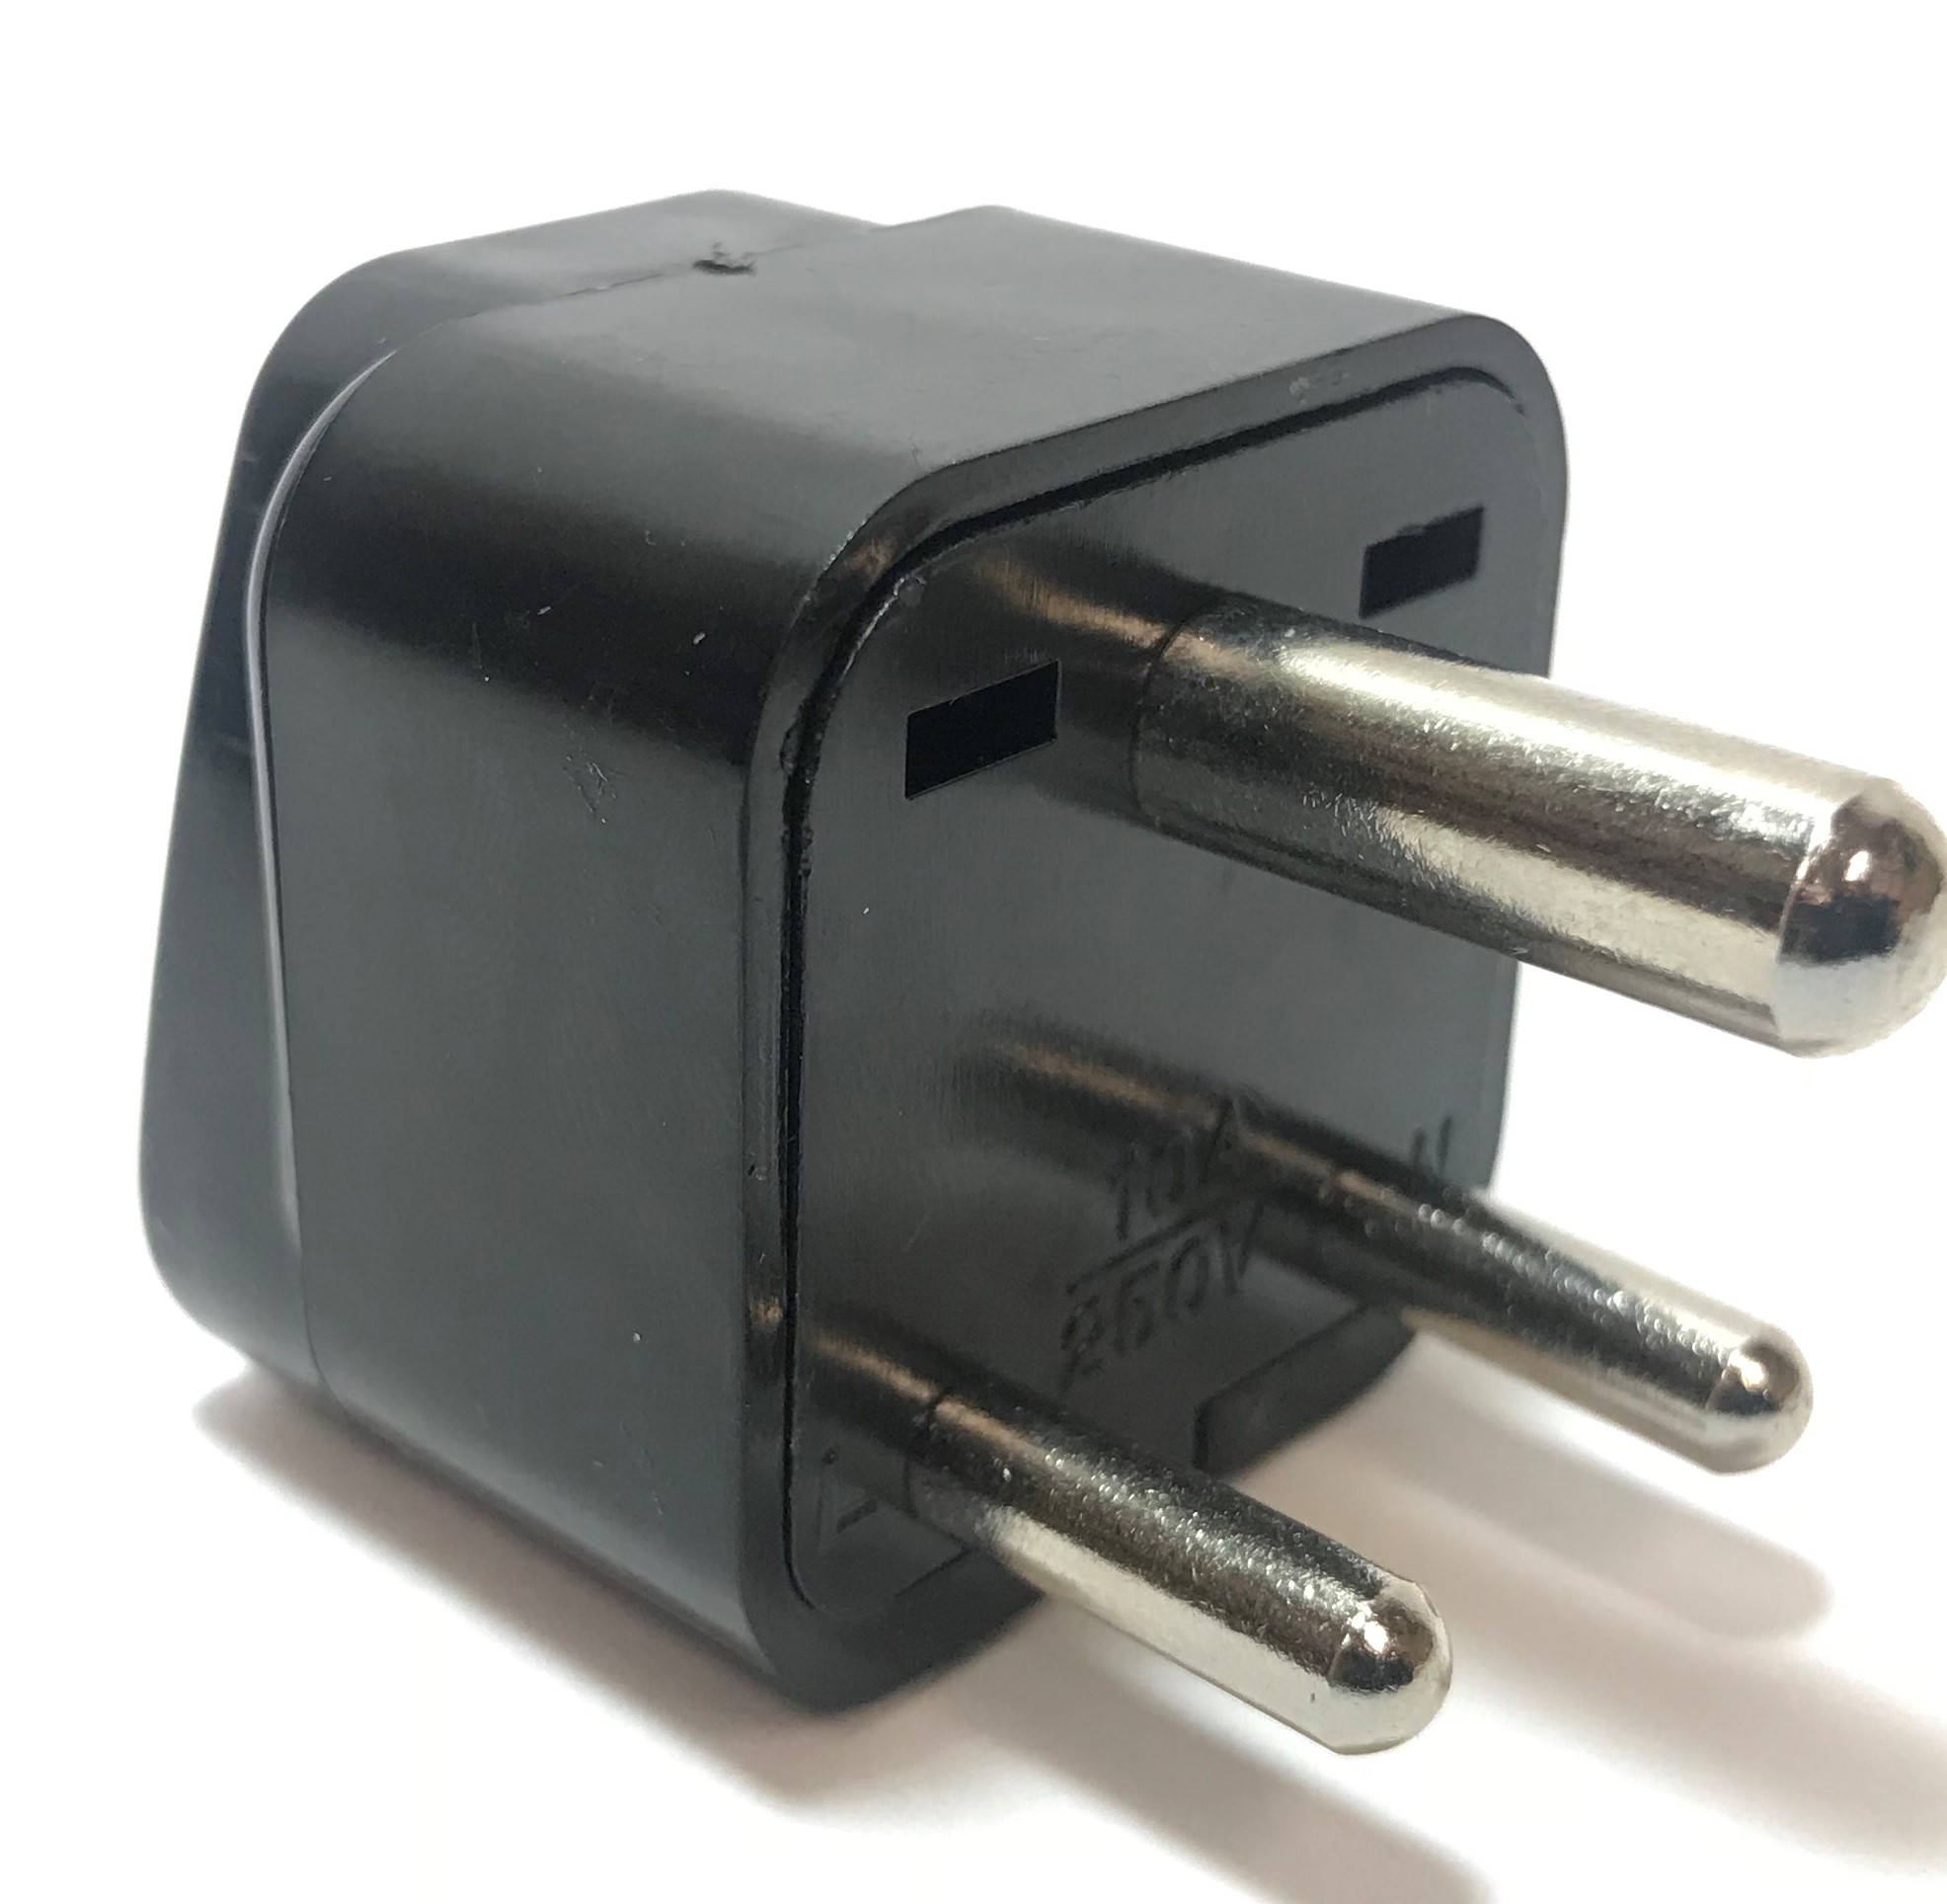 Type D India Universal To Indian Plug Adapter SS415 Black